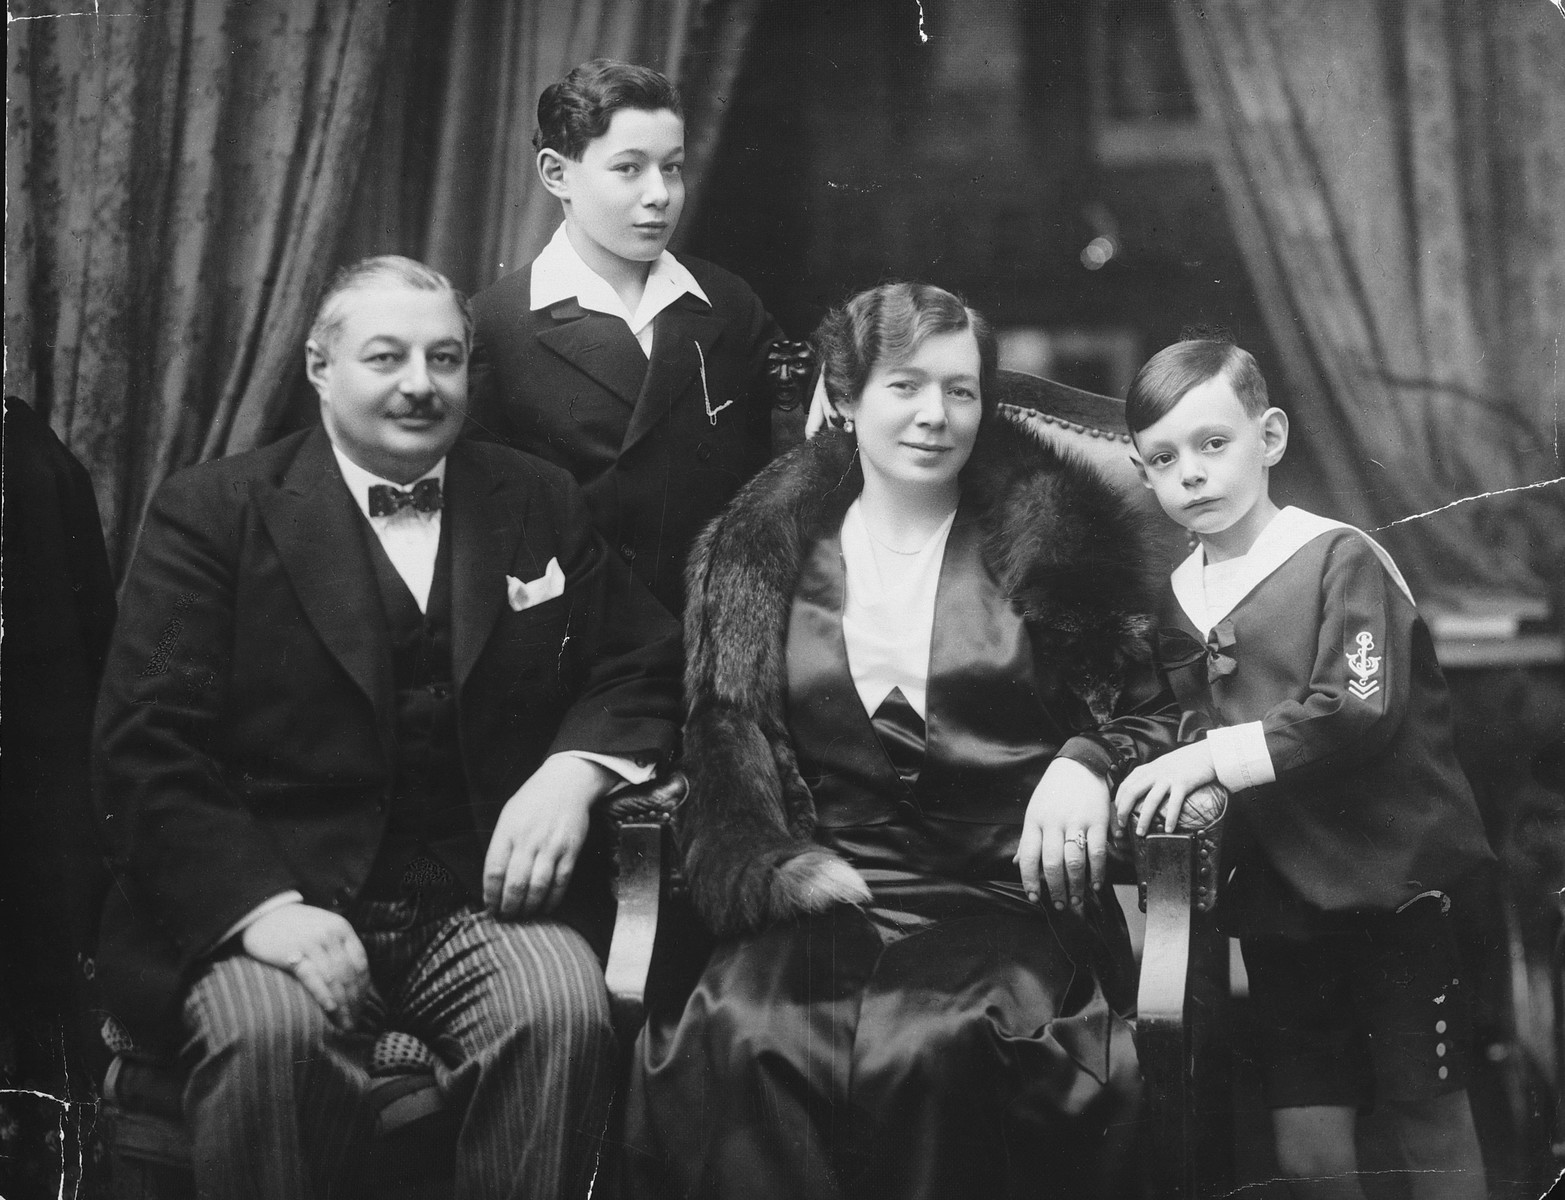 Studio portrait of a Hungarian-Jewish family.

Pictured from left to right are Zoltan, Paul, Iren and Robert Fisch.